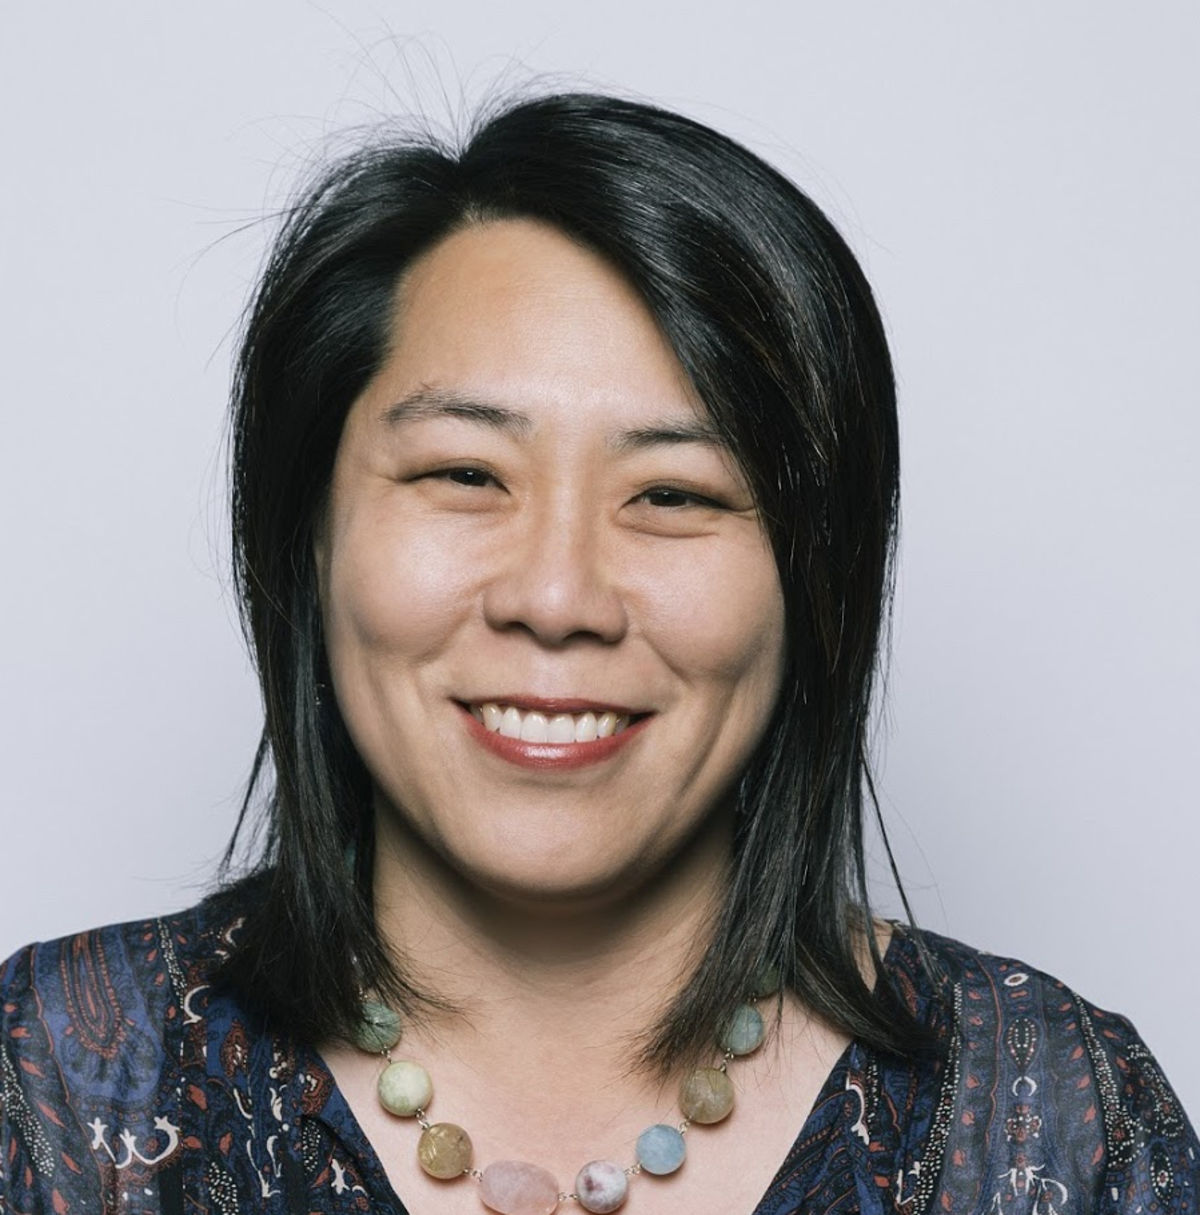 AXS, a global leader in ticketing, announces the addition of Christina Chu as Senior Vice President - Software Engineering (Phot